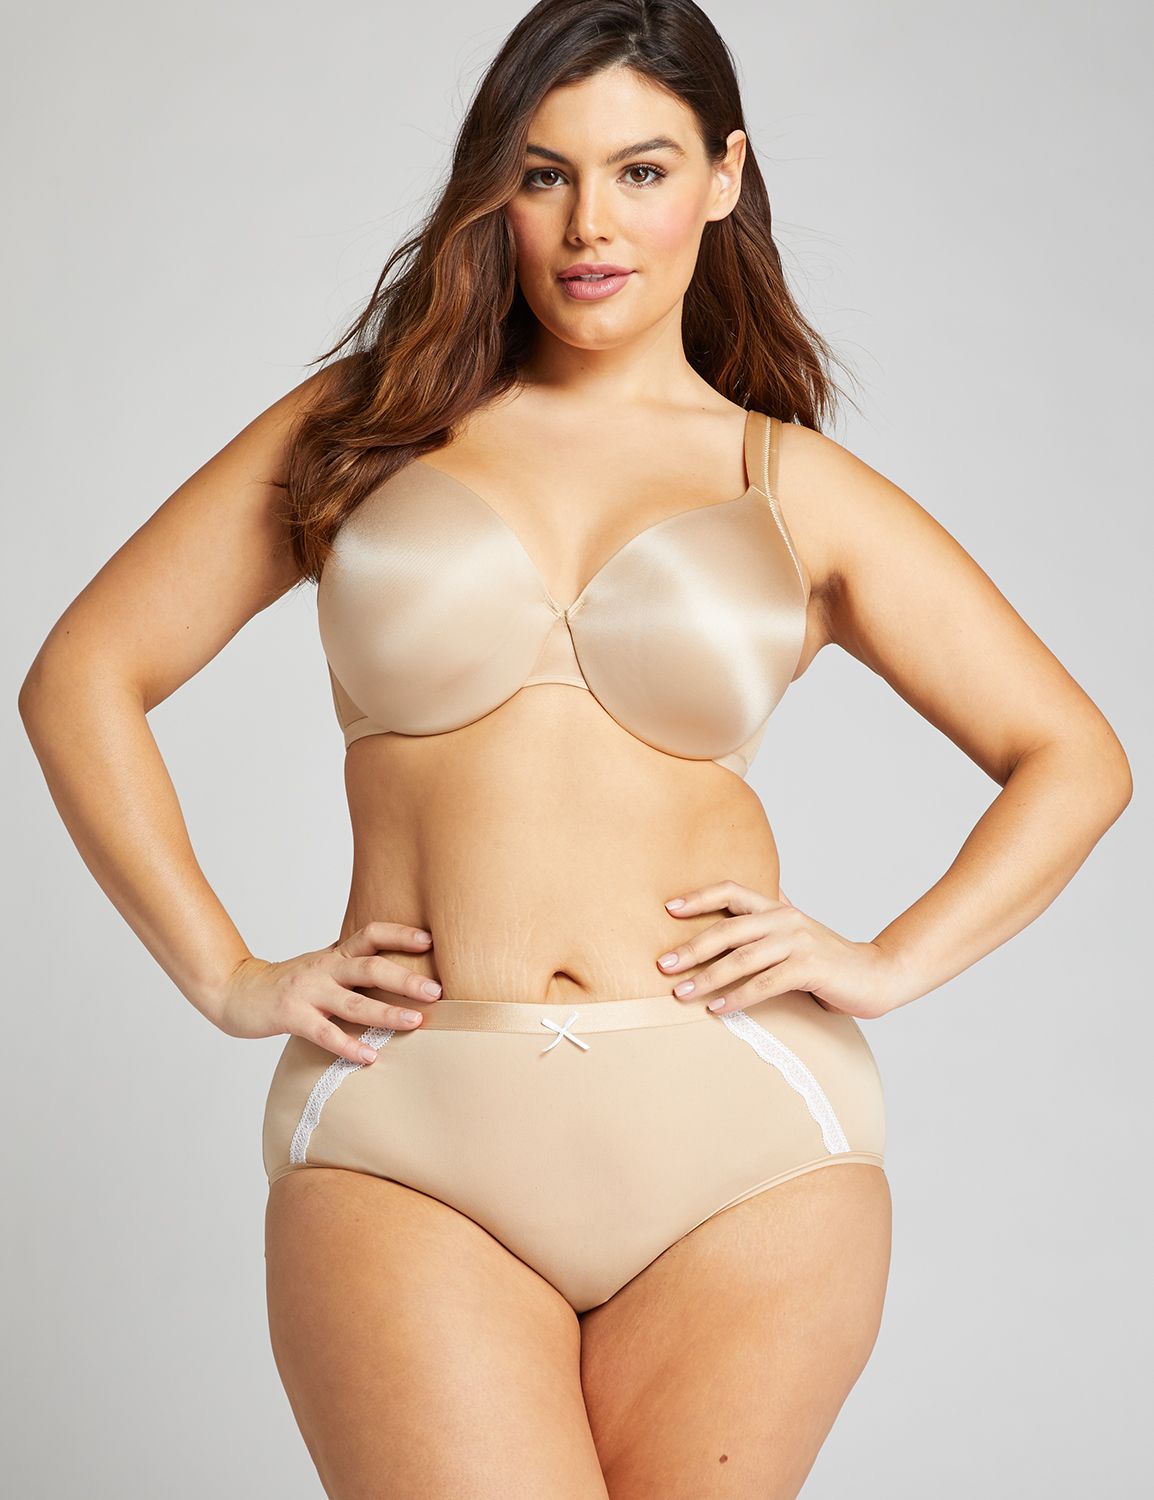 Lane Bryant: Cacique Bras B2G2 FREE + $25 off $75 + Earn Cacique